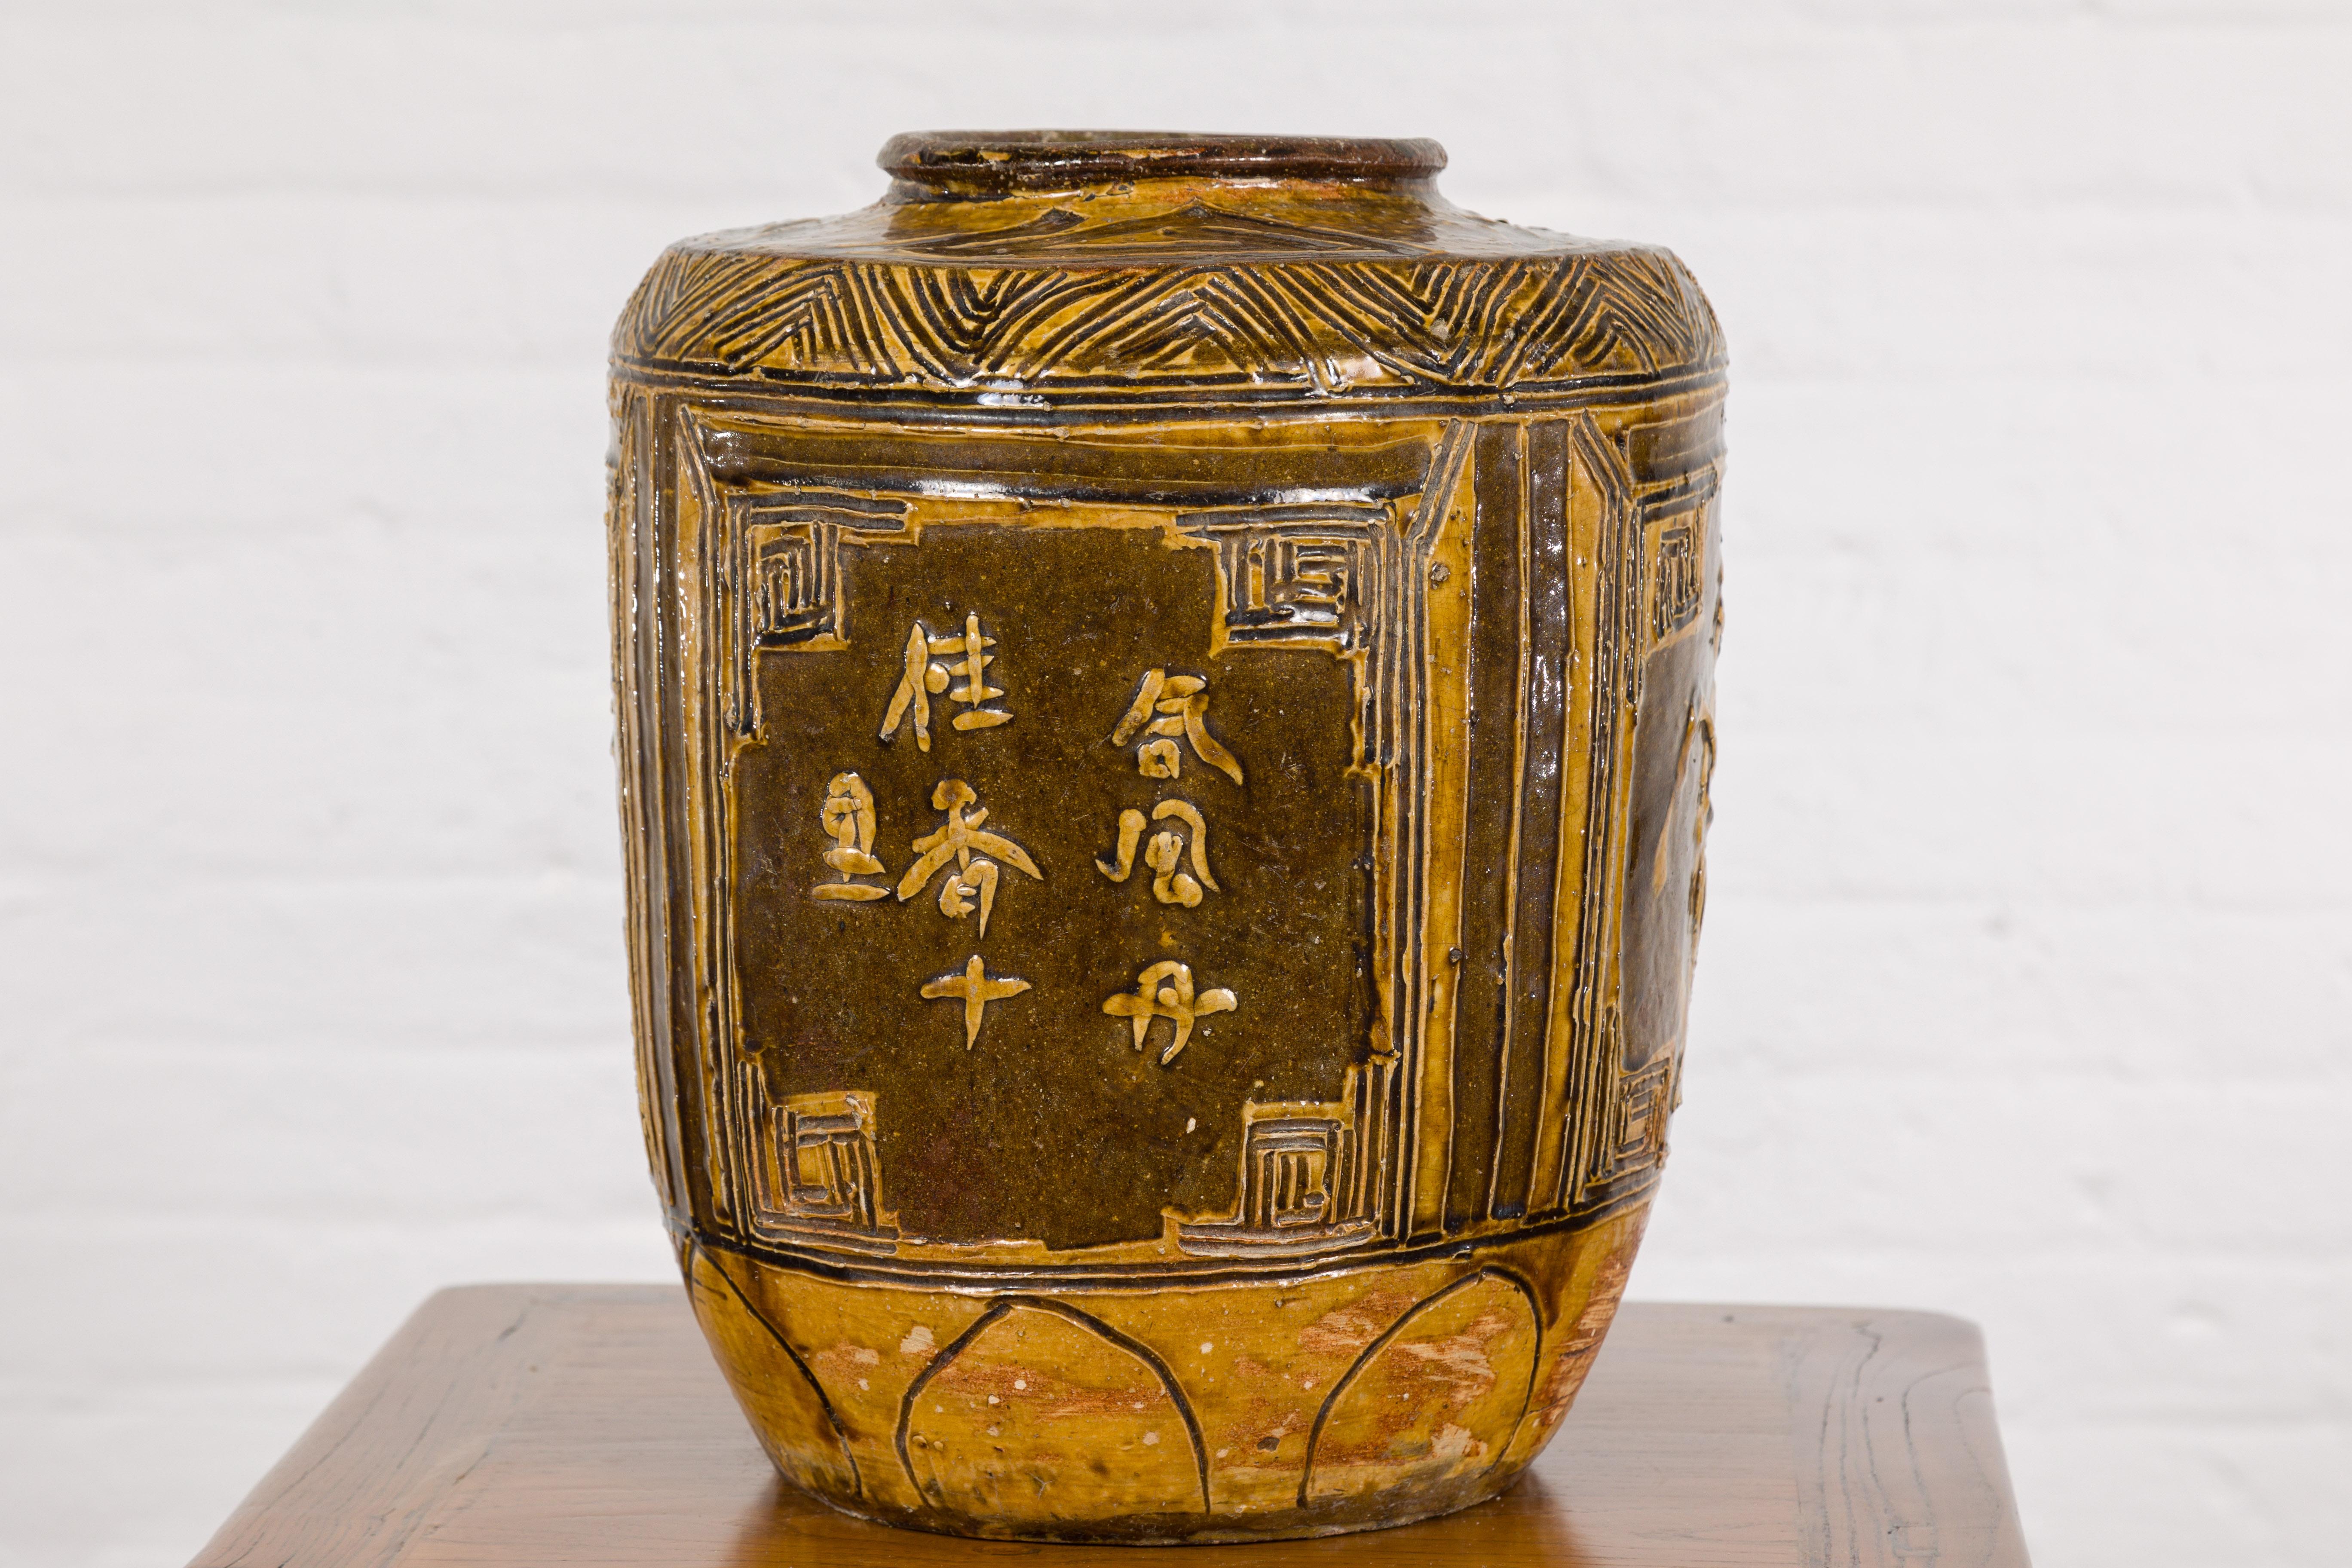 Two-Toned Brown Vase with Archaic Style Figures and Calligraphy Motifs For Sale 6